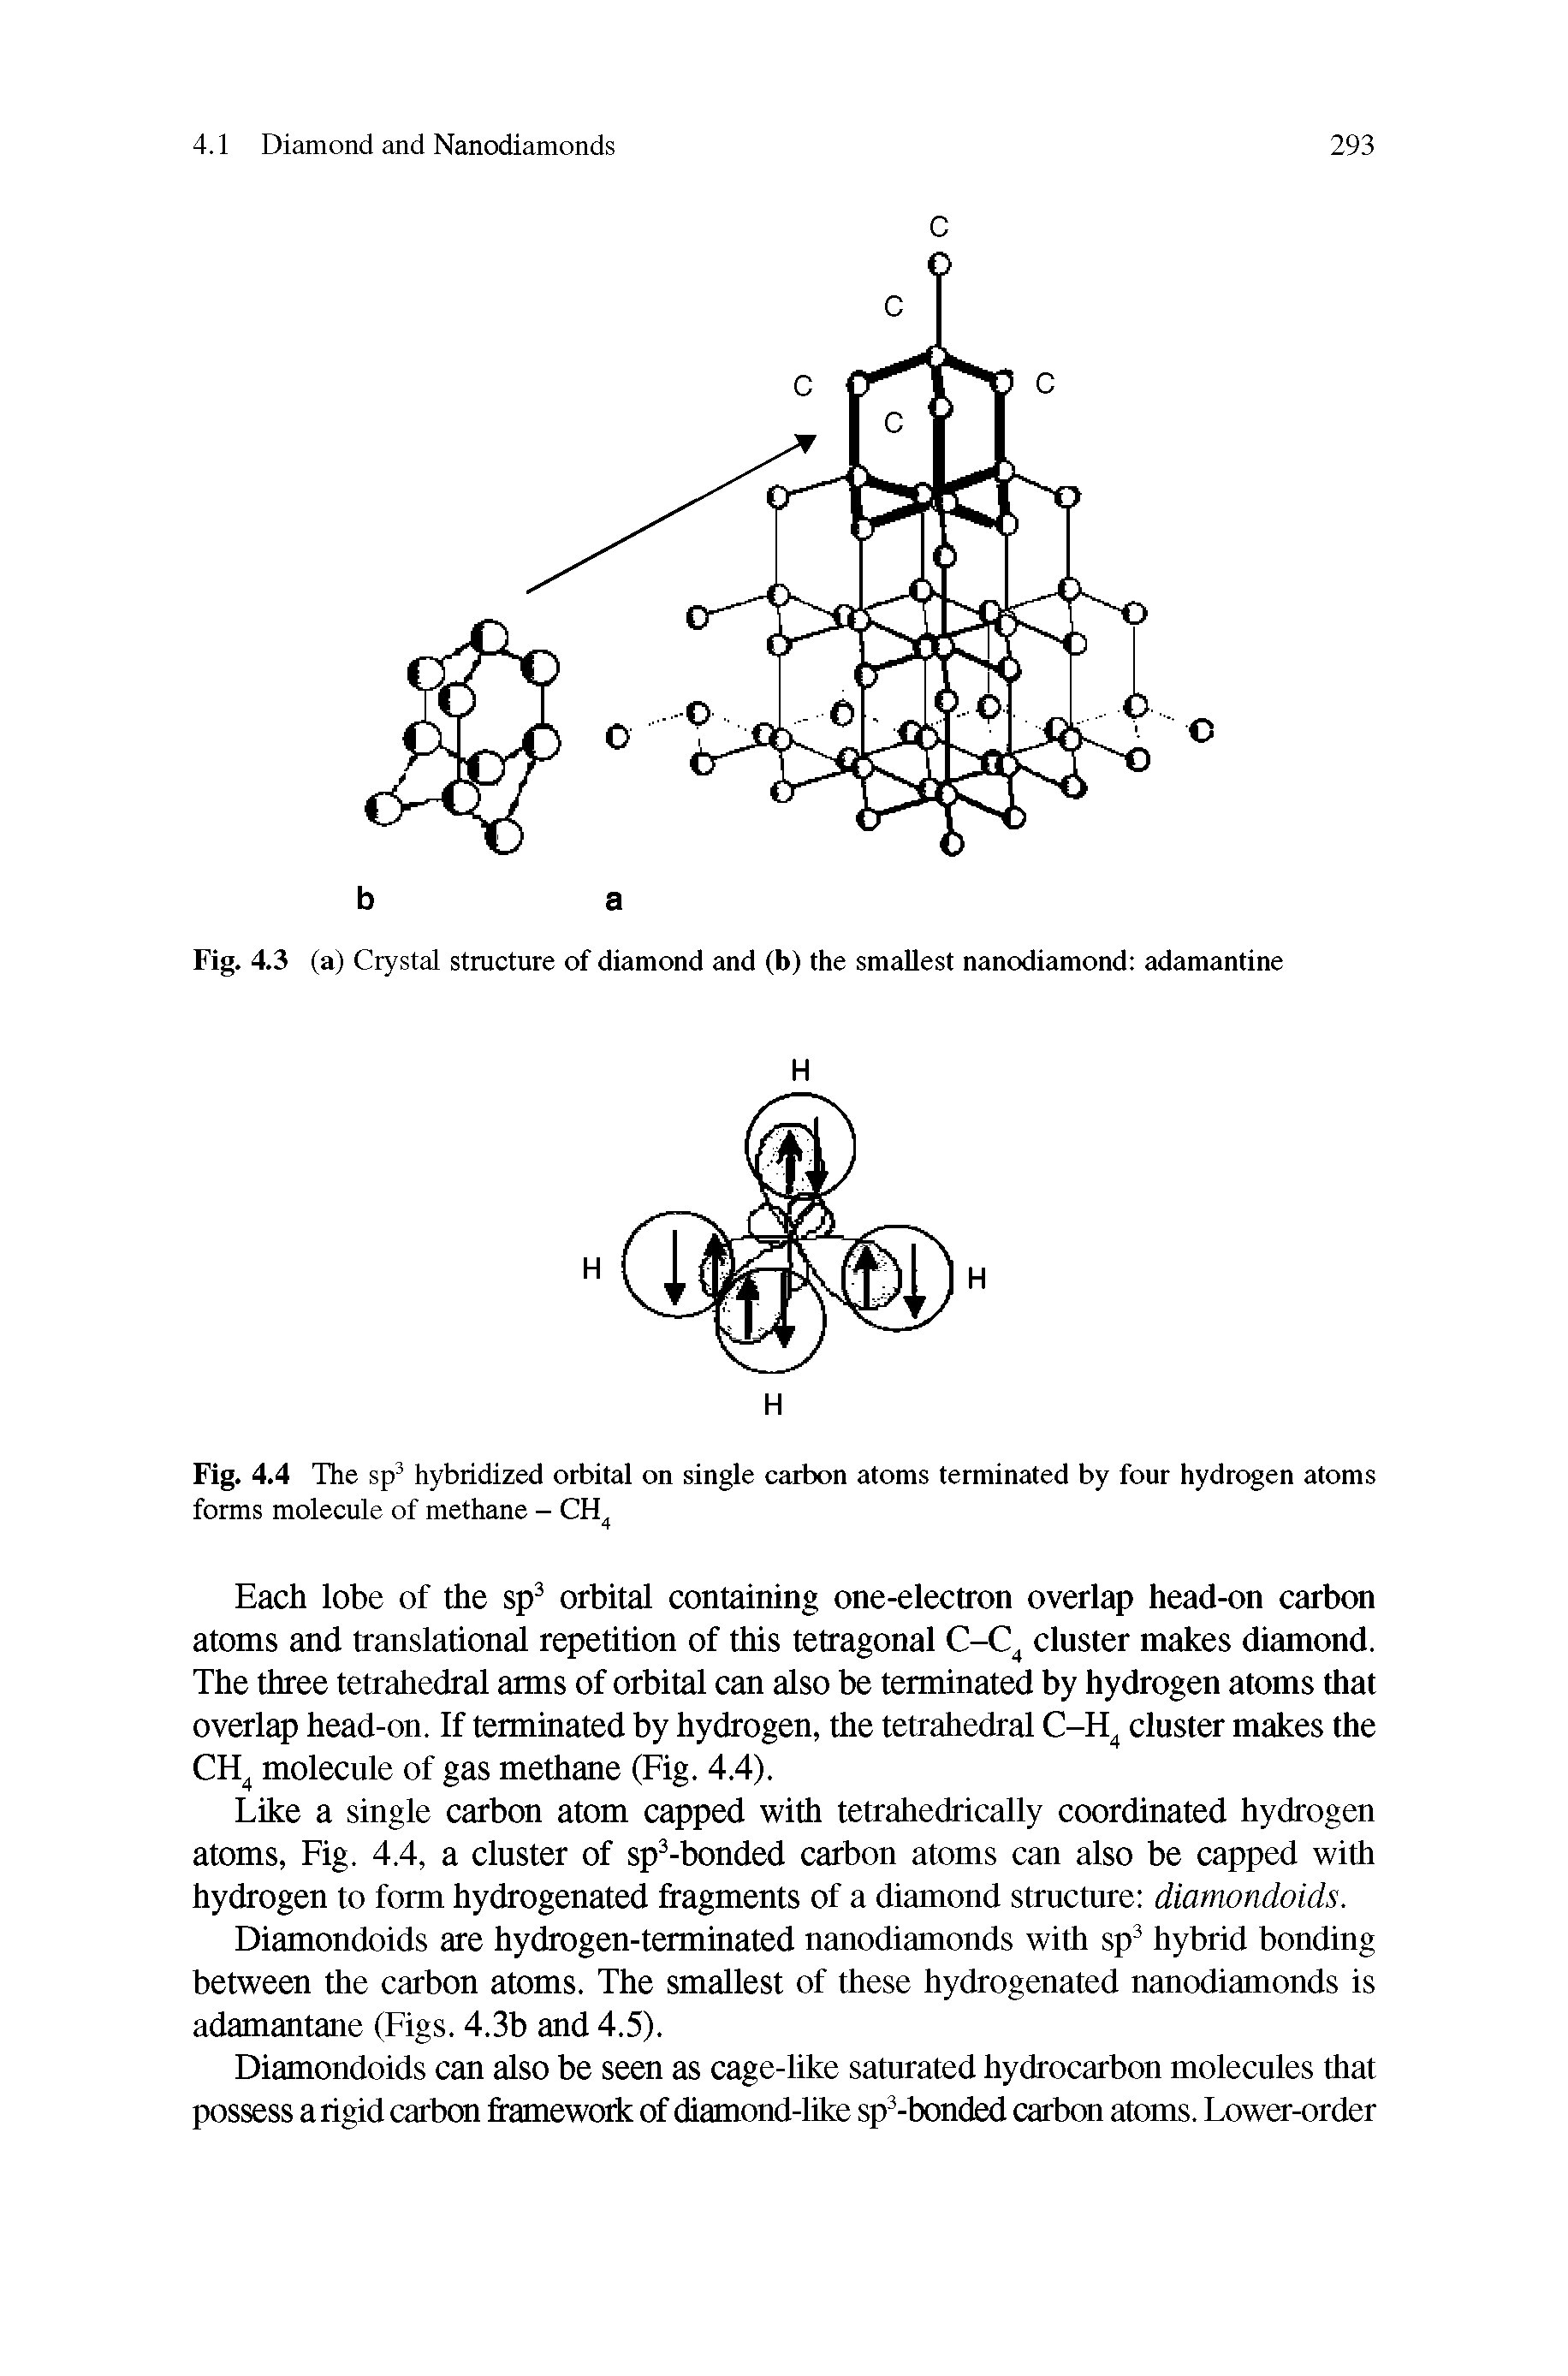 Fig. 4.4 The sp hybridized orbital on single carbon atoms terminated by four hydrogen atoms forms molecule of methane - CH,...